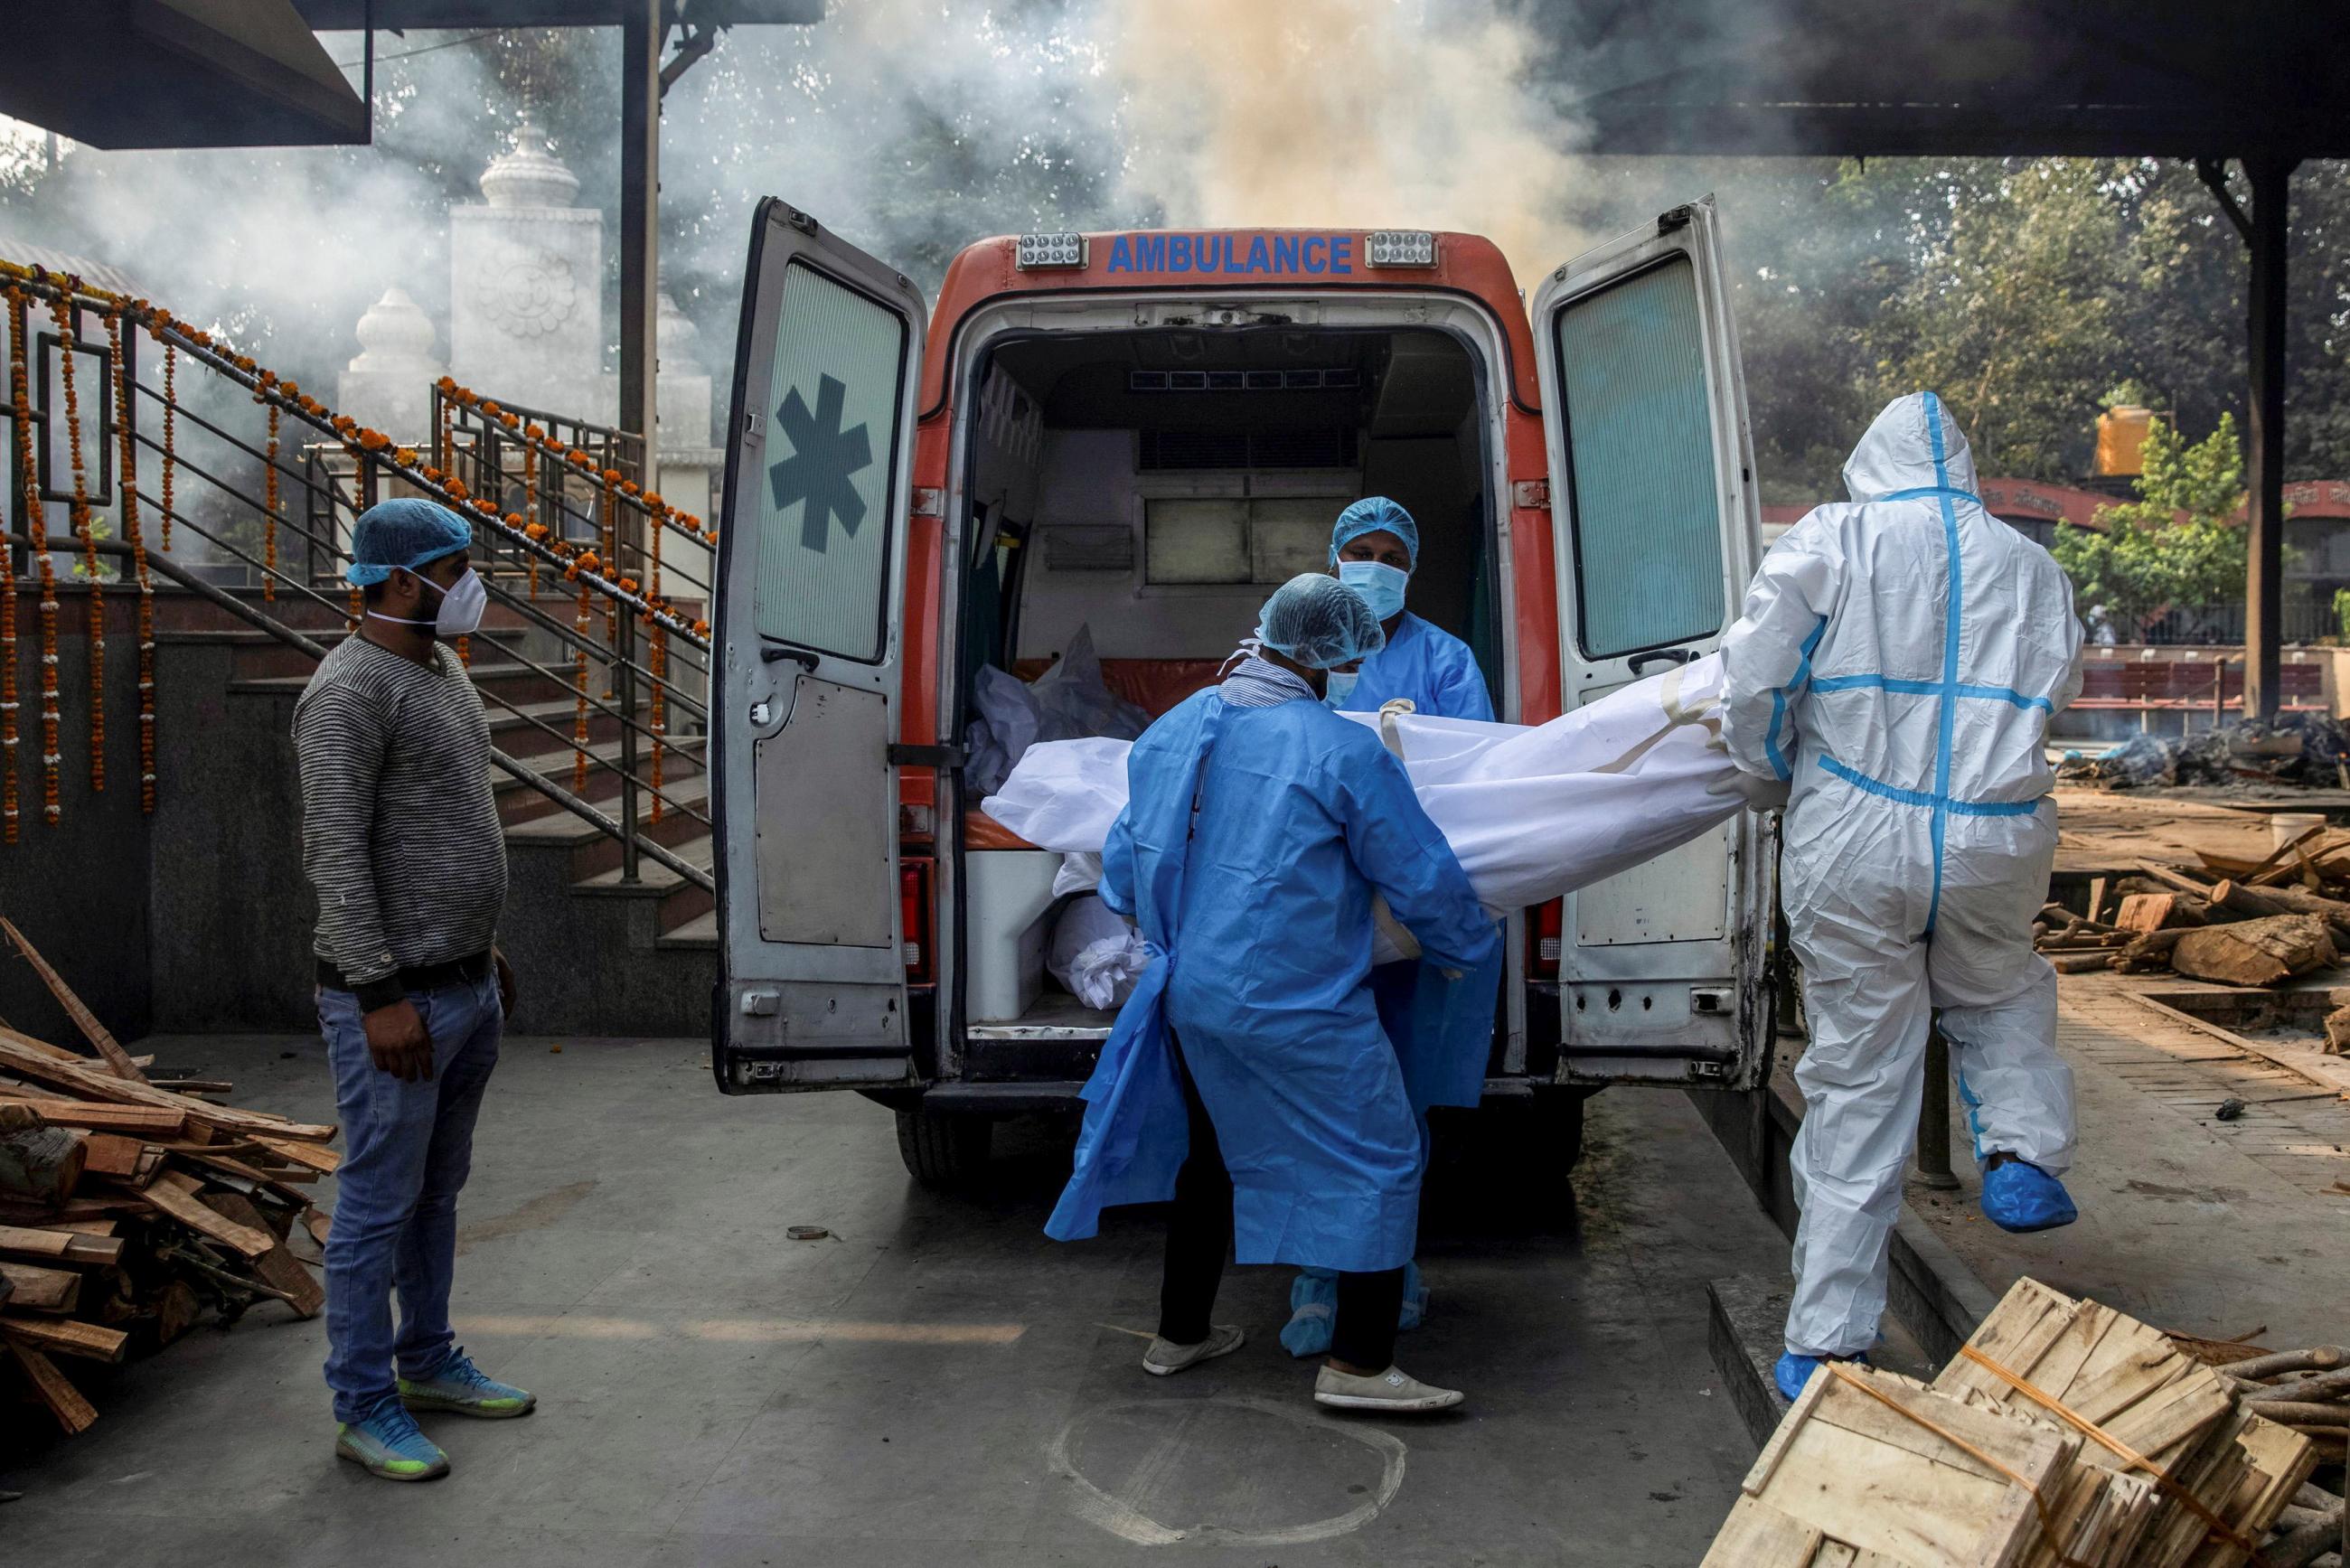 Health workers and a relative carry the body of a man, who died due to COVID-19, from an ambulance to a crematorium in New Delhi, India, November 13, 2020.